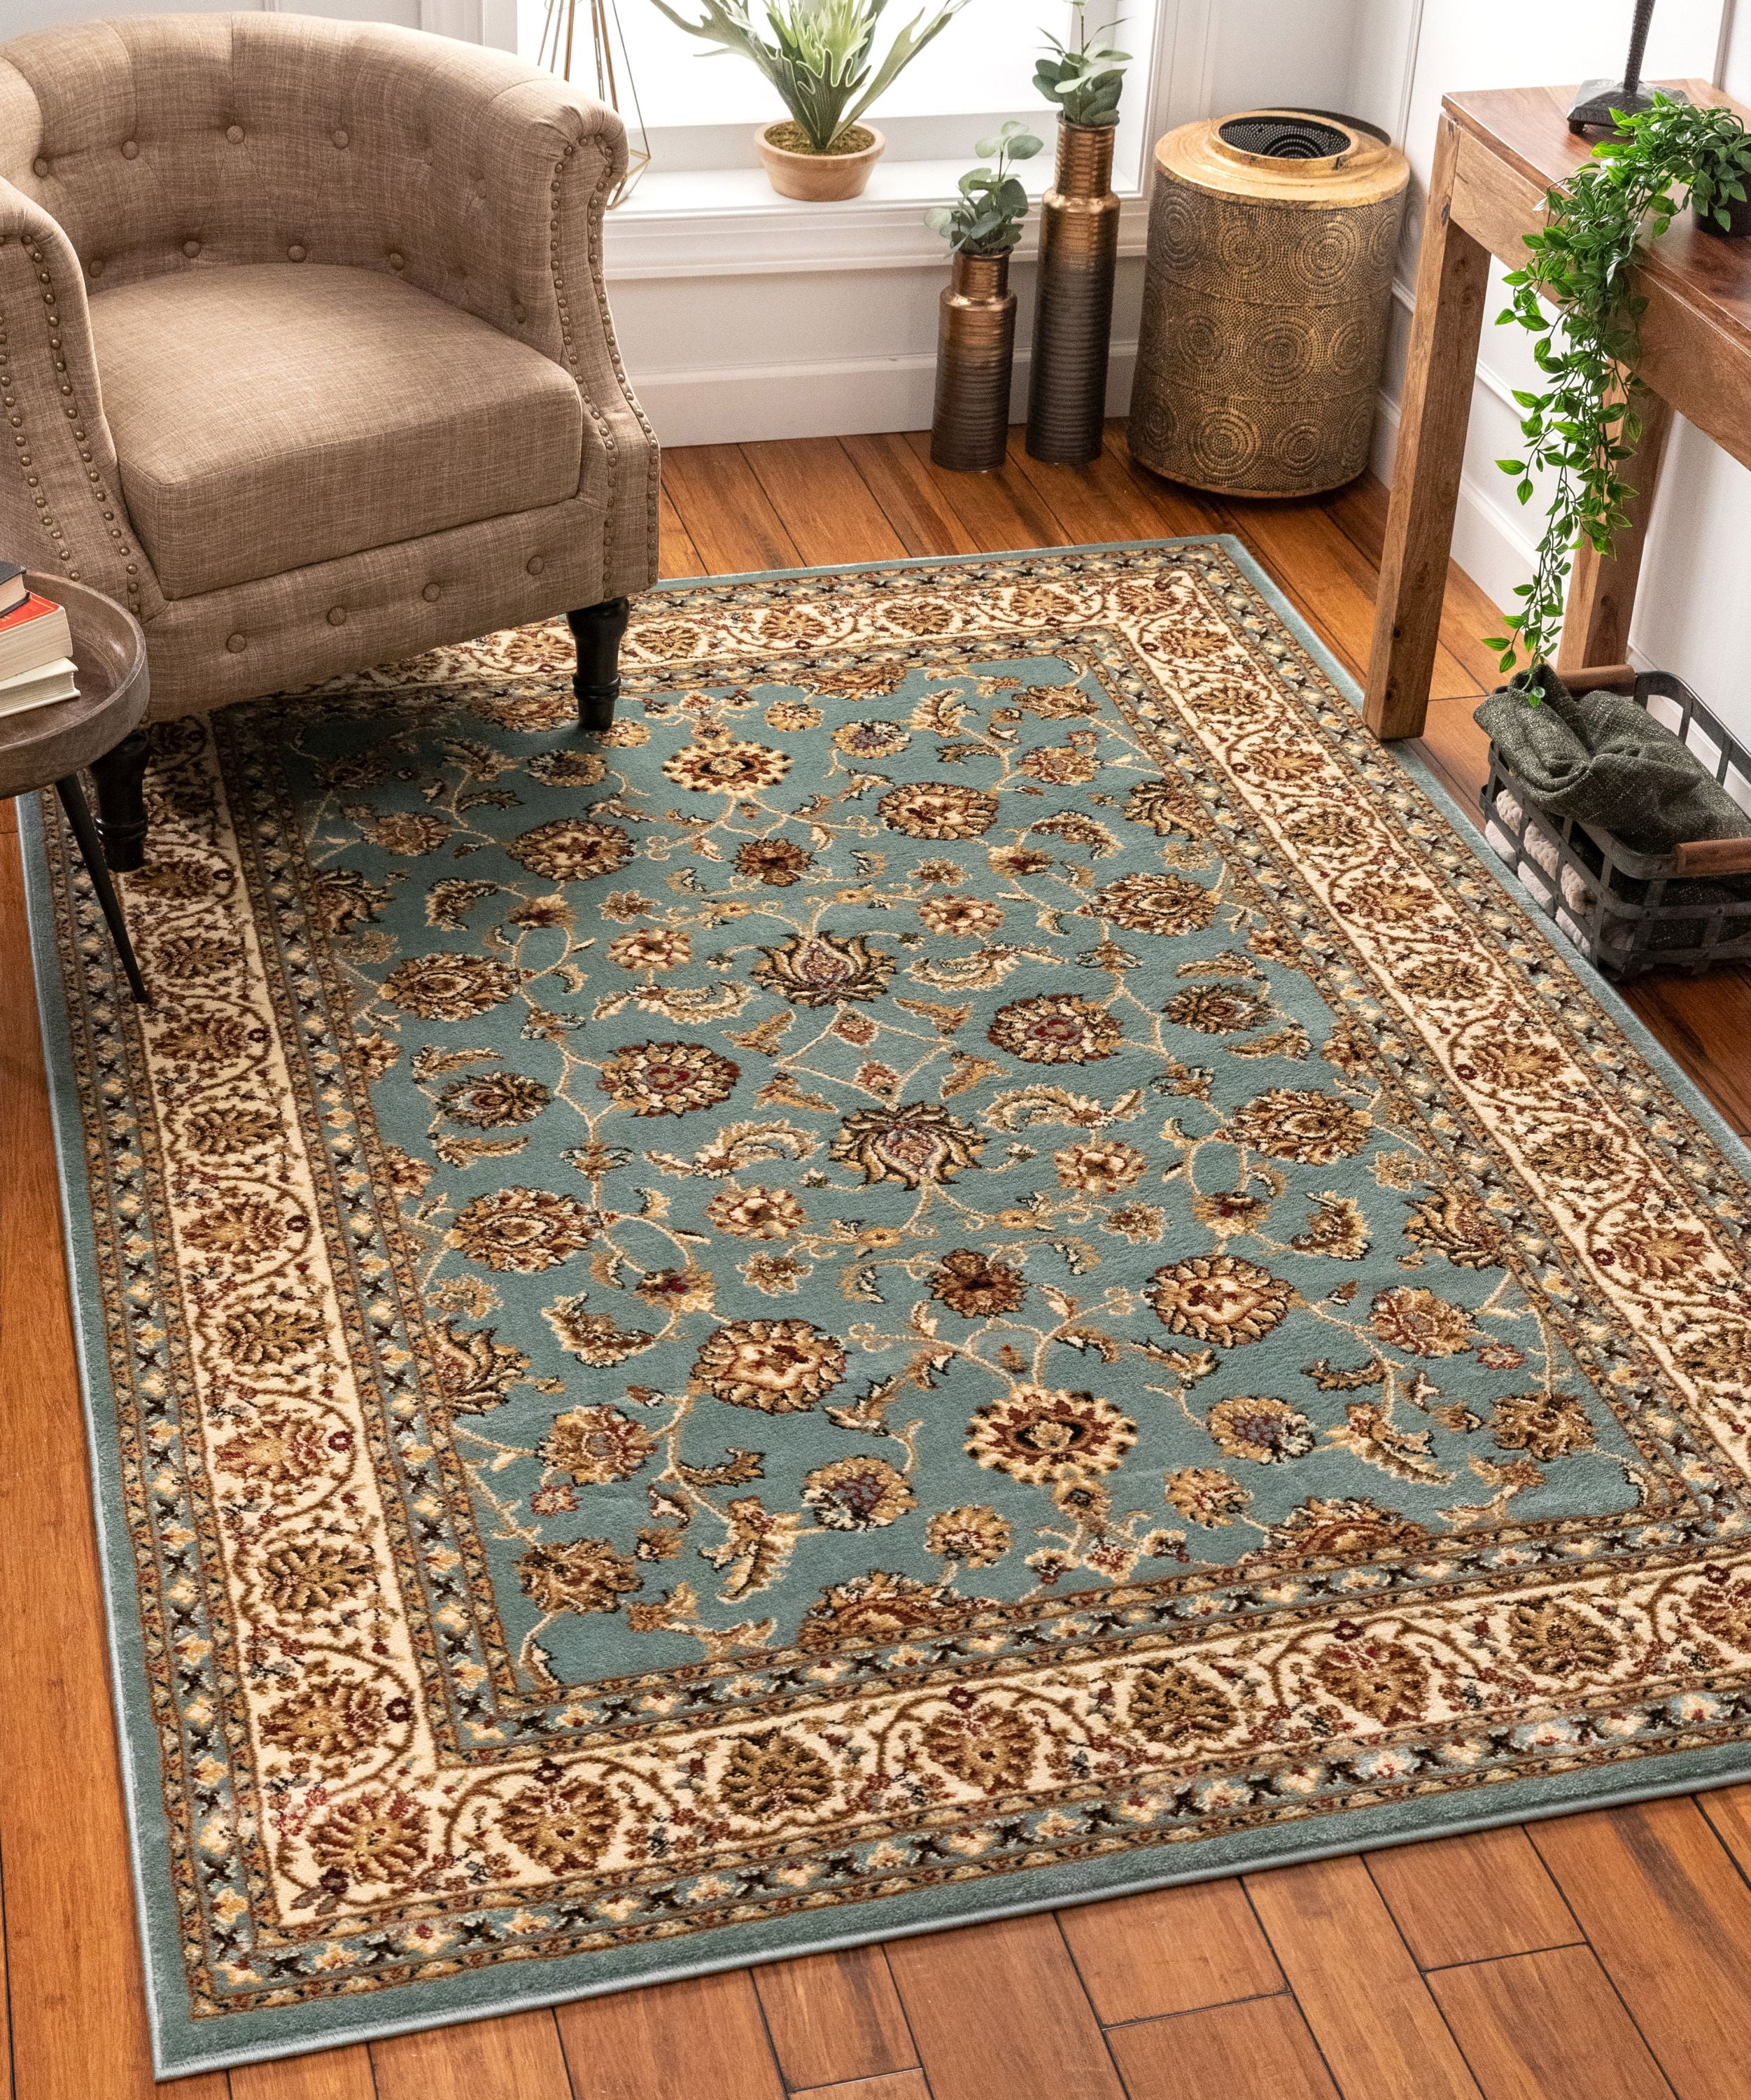 Noble Medallion Black Persian Floral Oriental Formal Traditional Area Rug 8x10 8x11 Easy to Clean Stain Fade Resistant Shed Free Modern Contemporary Soft Living Dining Room Rug 7'10 x 9'10